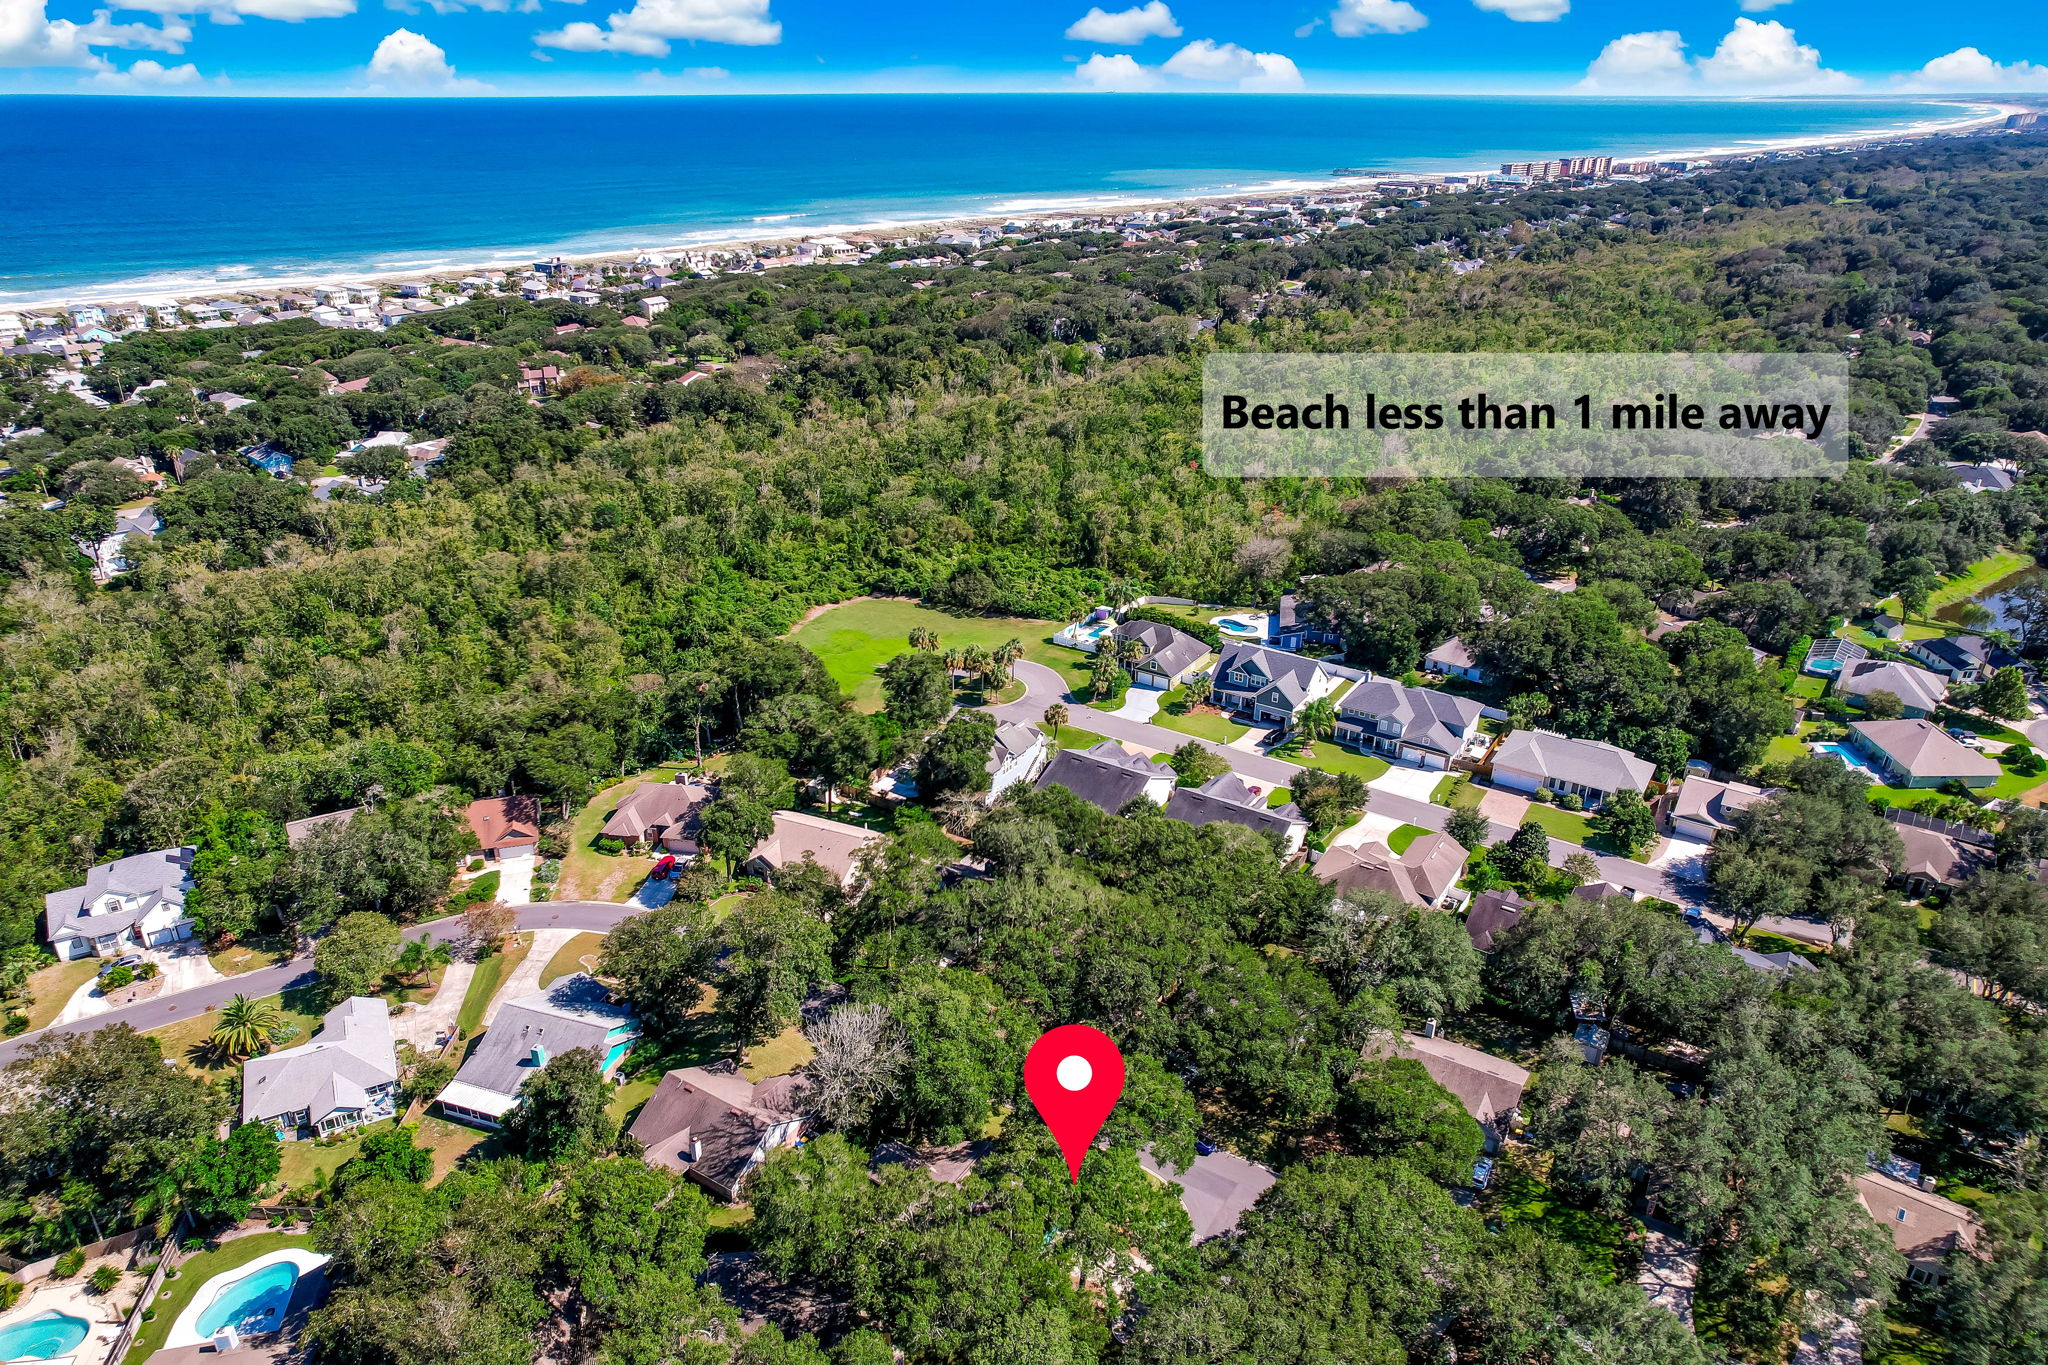 You'll value the home's proximity to the beach, just under a mile away.